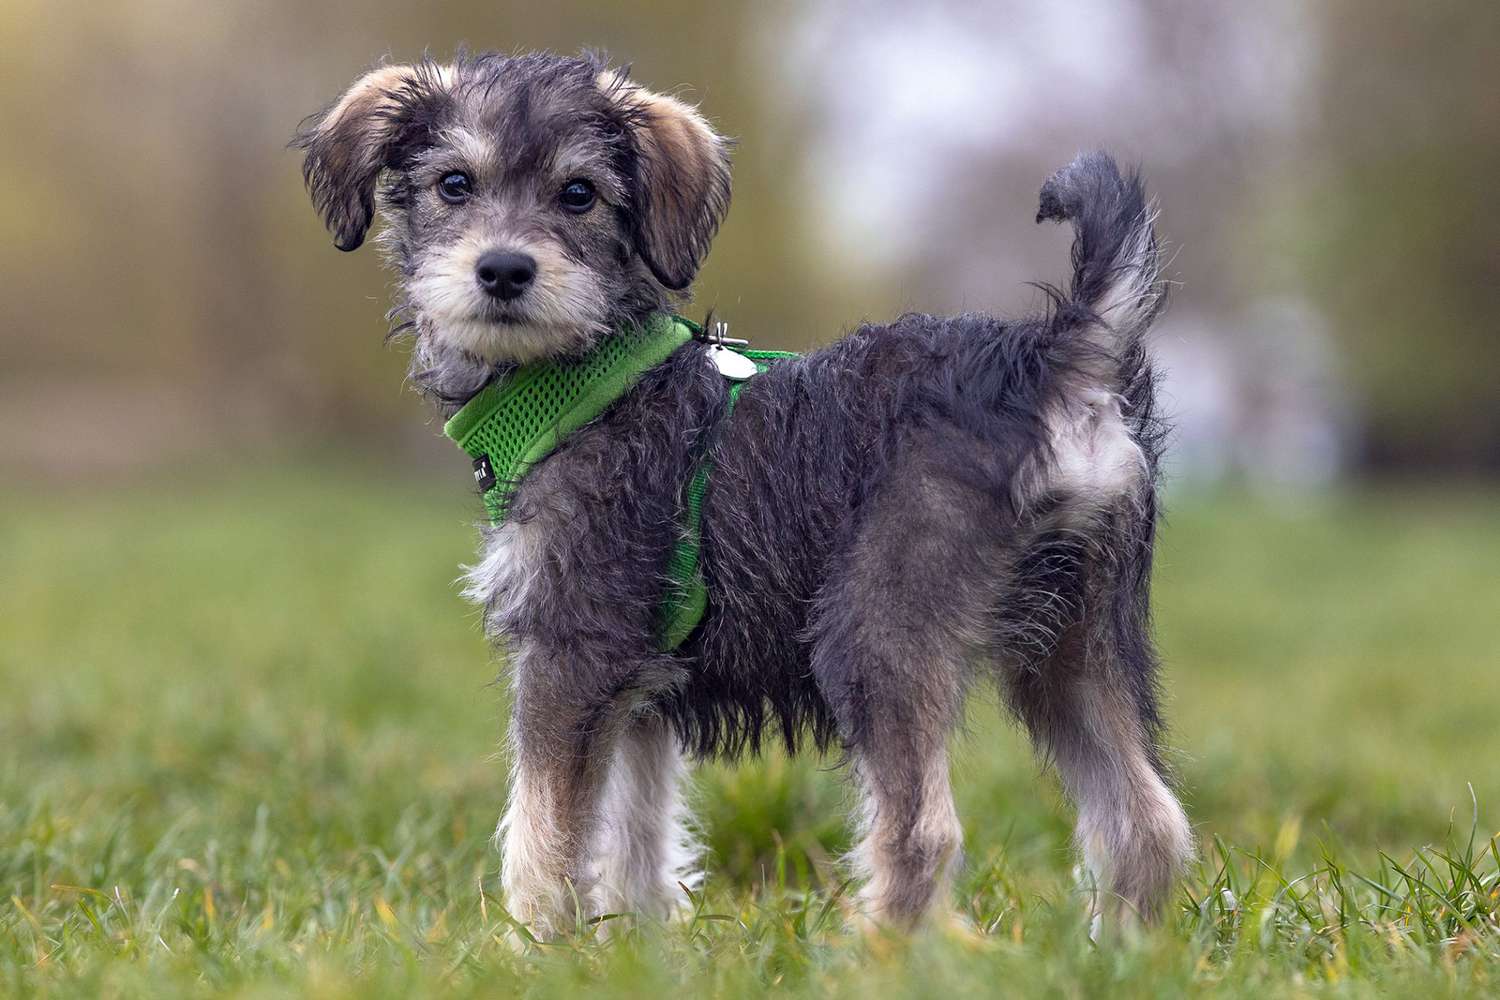 schnoodle puppy wearing green harness standing in grass